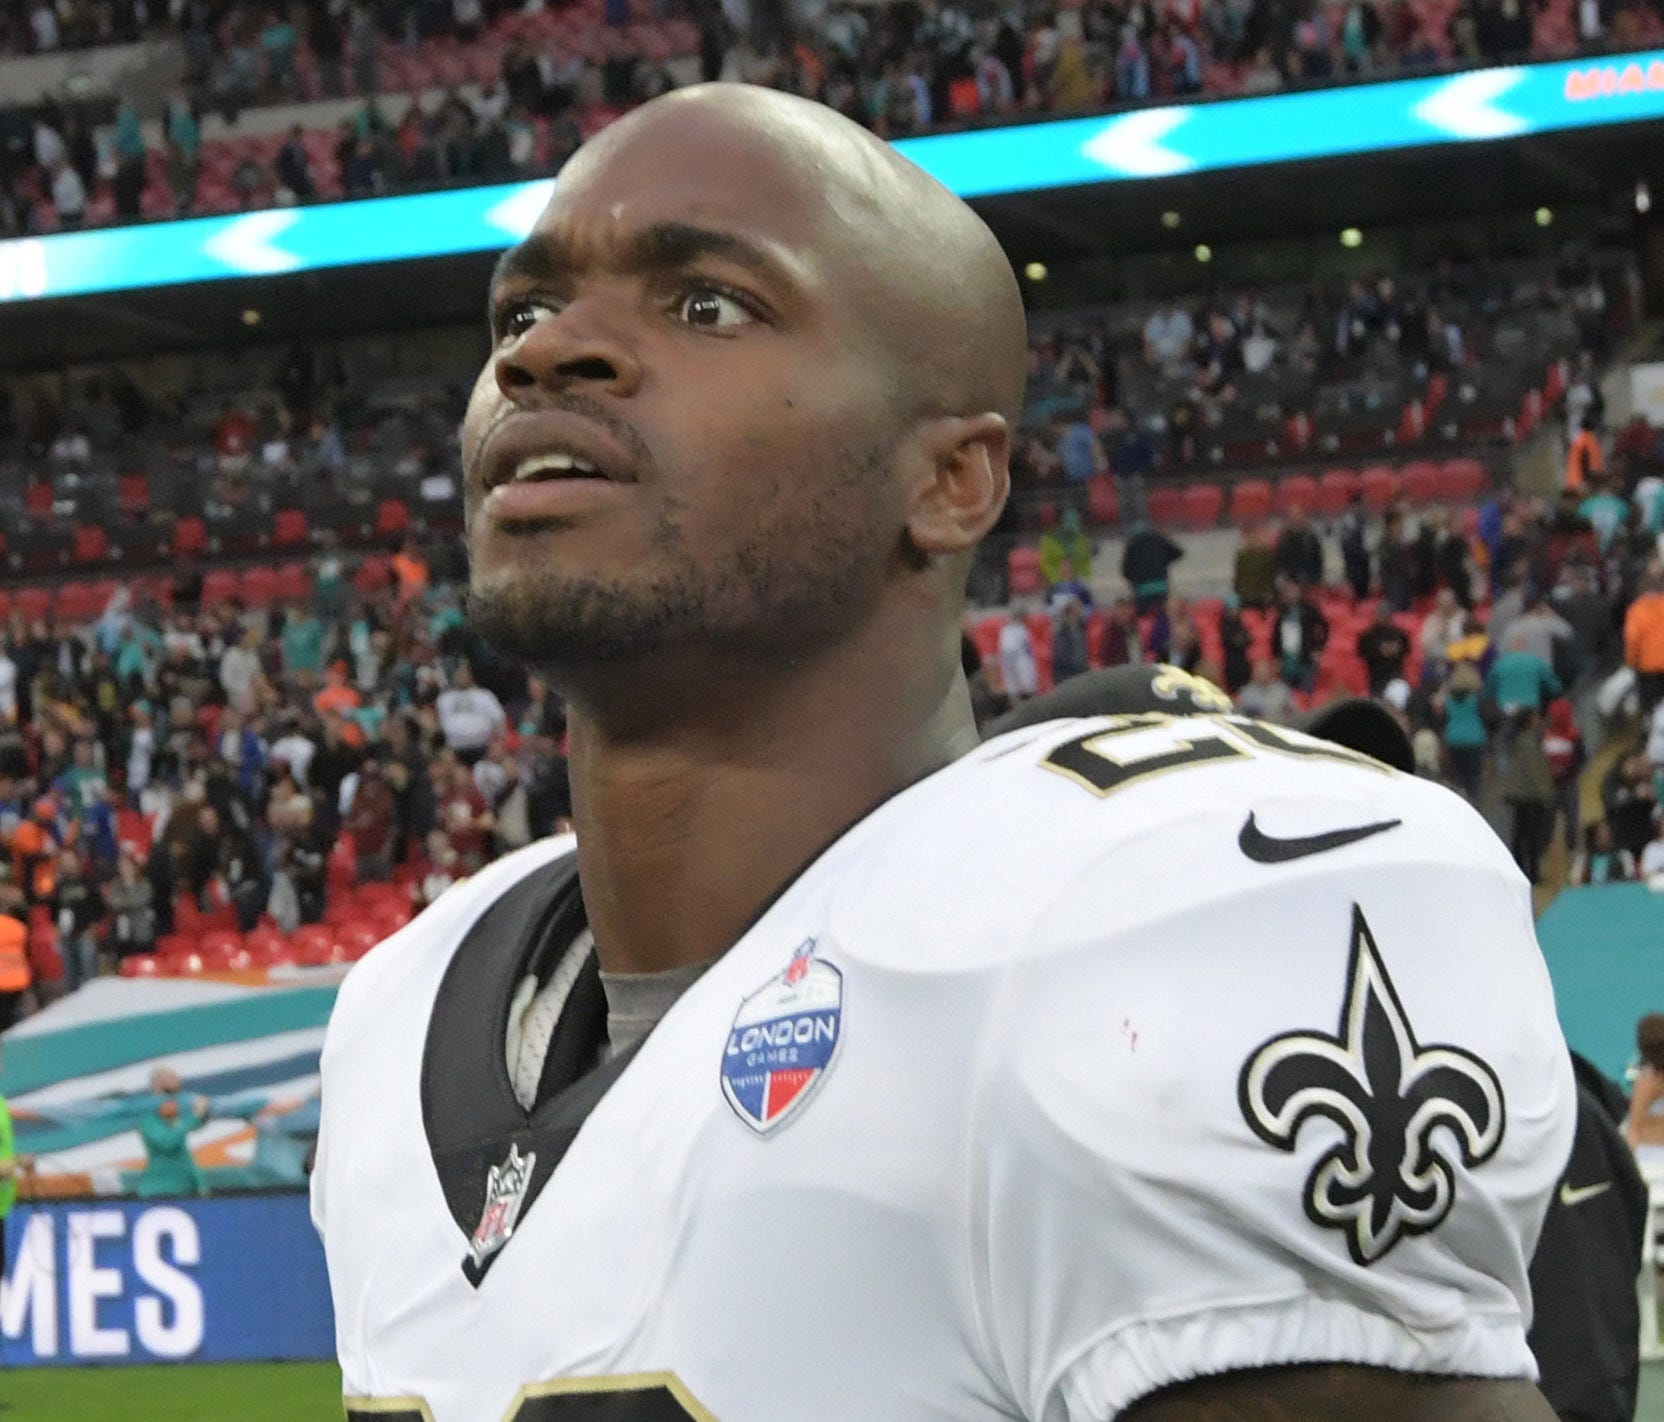 New Orleans Saints running back Adrian Peterson (28) reacts after the NFL International Series game against the Miami Dolphins at Wembley Stadium.